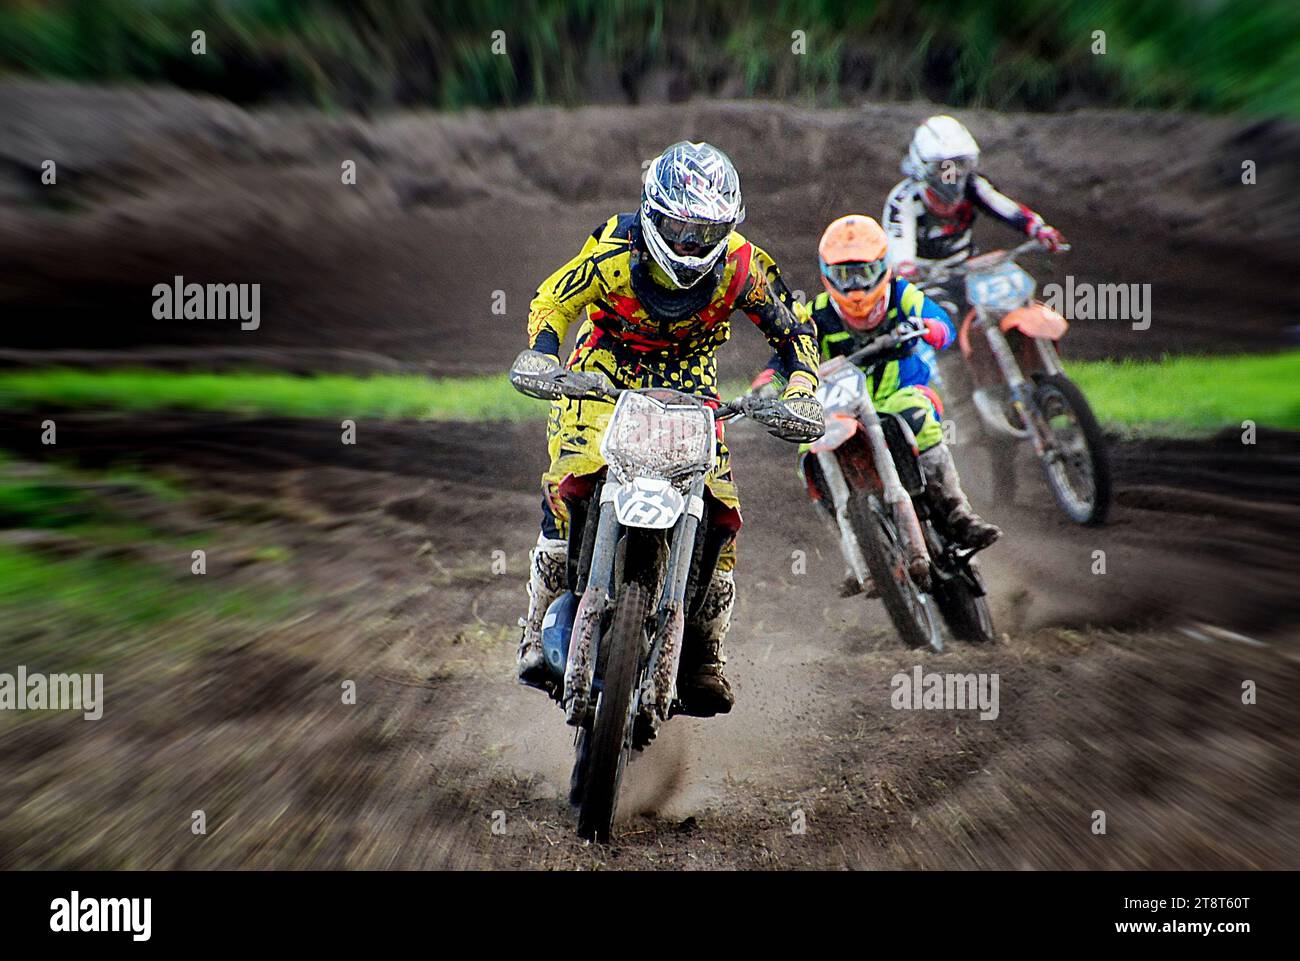 The chase, Motocross is a form of off-road motorcycle racing held on enclosed off-road circuits. The sport evolved from motorcycle trials competitions held in the United Kingdom Stock Photo